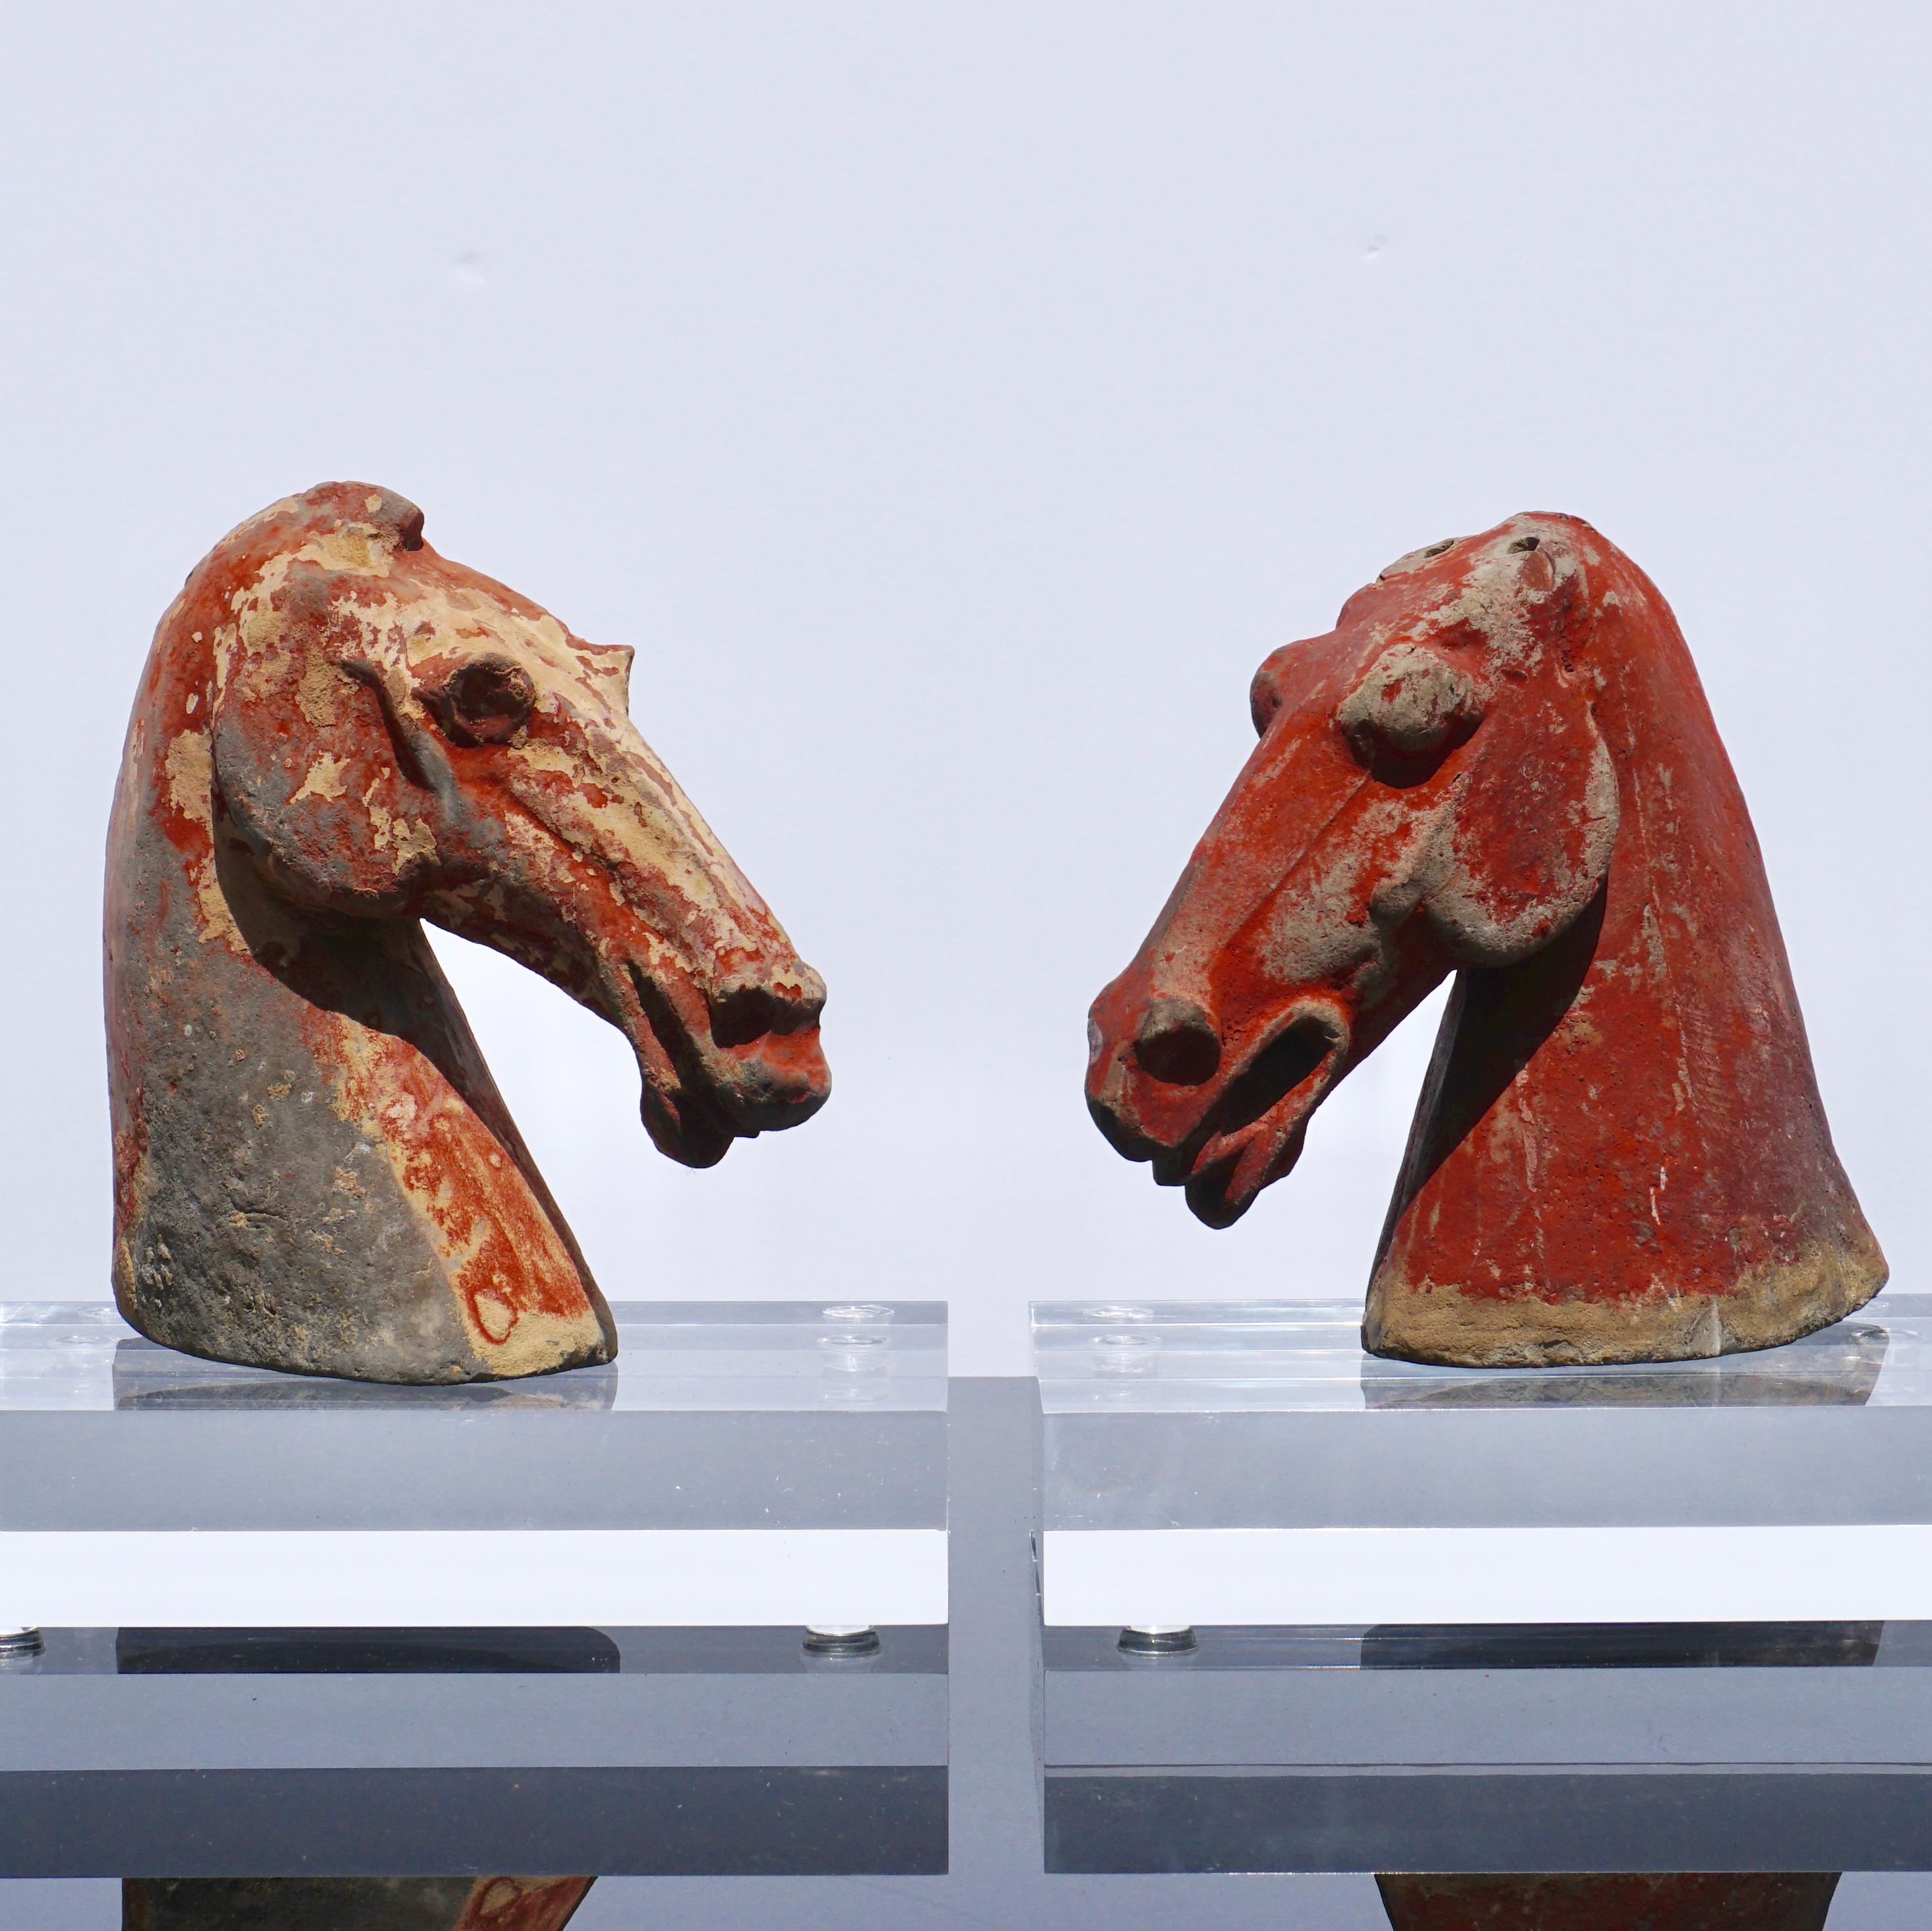 Pair of Chinese Han dynasty horse heads
Han dynasty (206 BC-220 AD) earthenware gray pottery

Each approximate measures: 6 inches high. 6.5 inches wide. 2.5 inches depth

Accompanied by clear plexiglass display stands. No TL tests but guaranteed